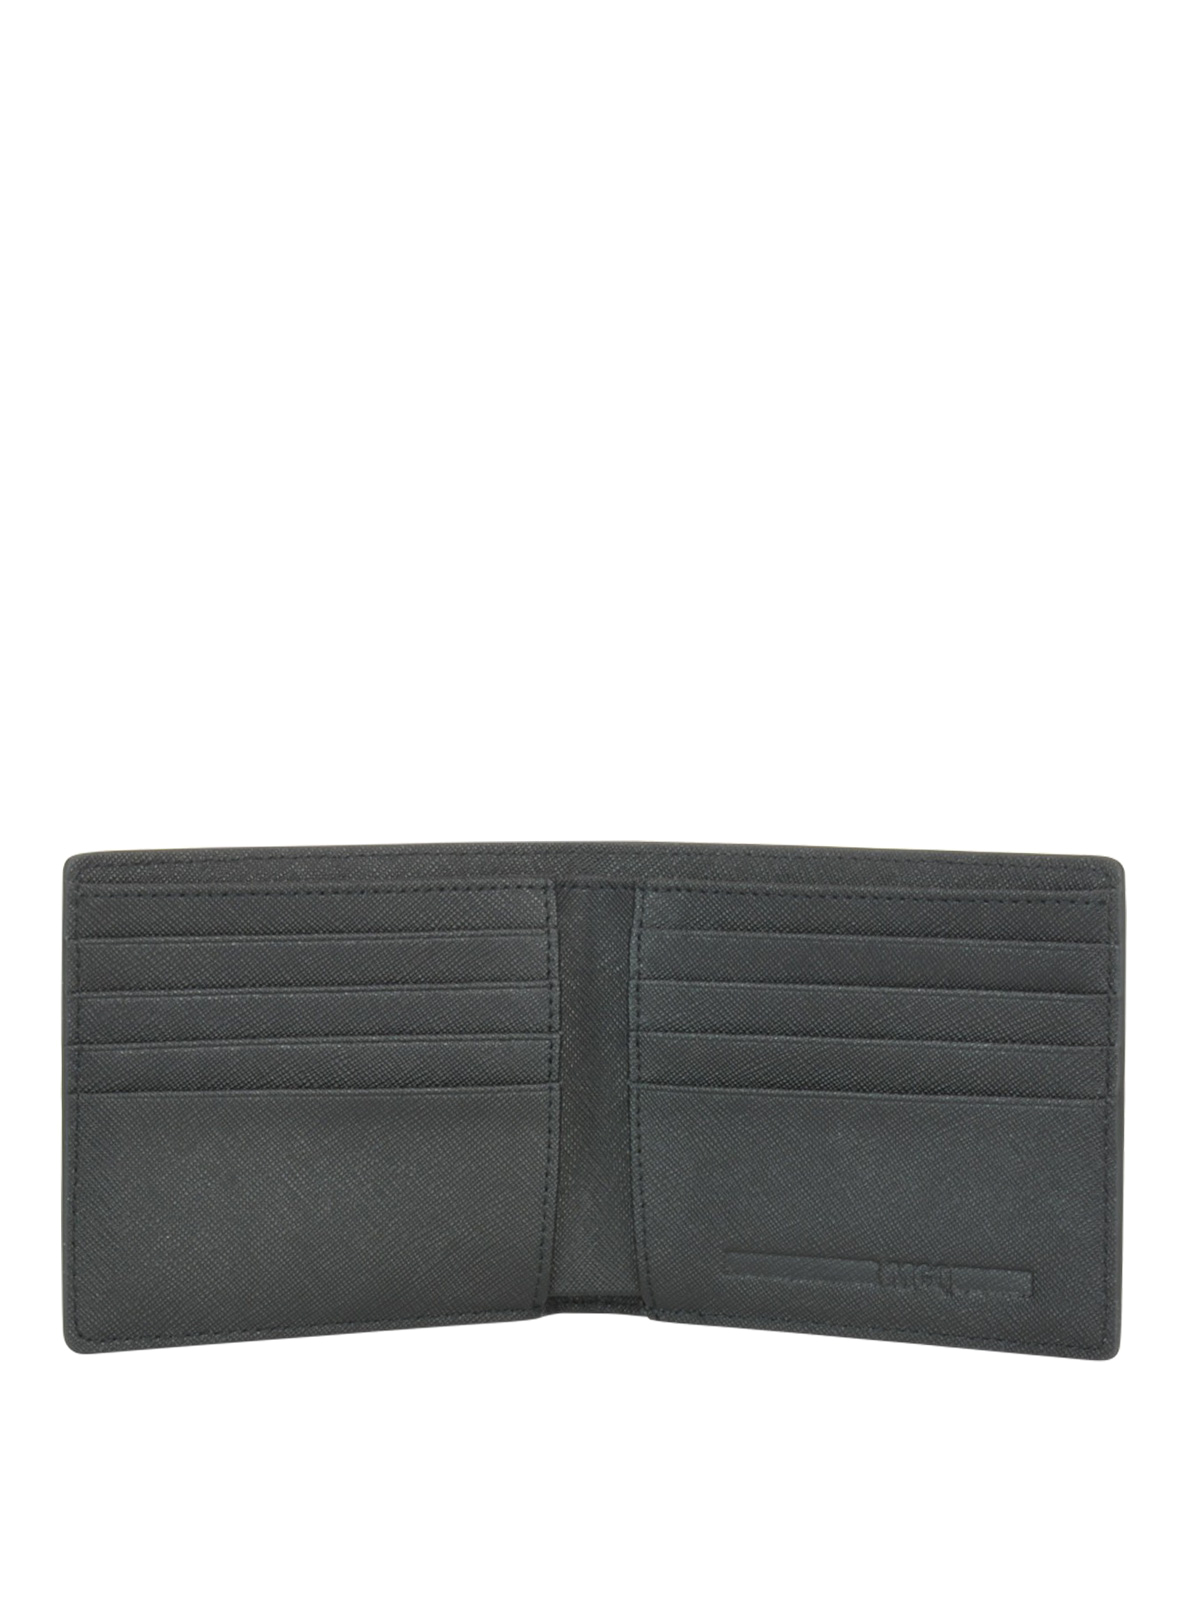 Women's Leather Wallet Made With Genuine Leather by Moonster